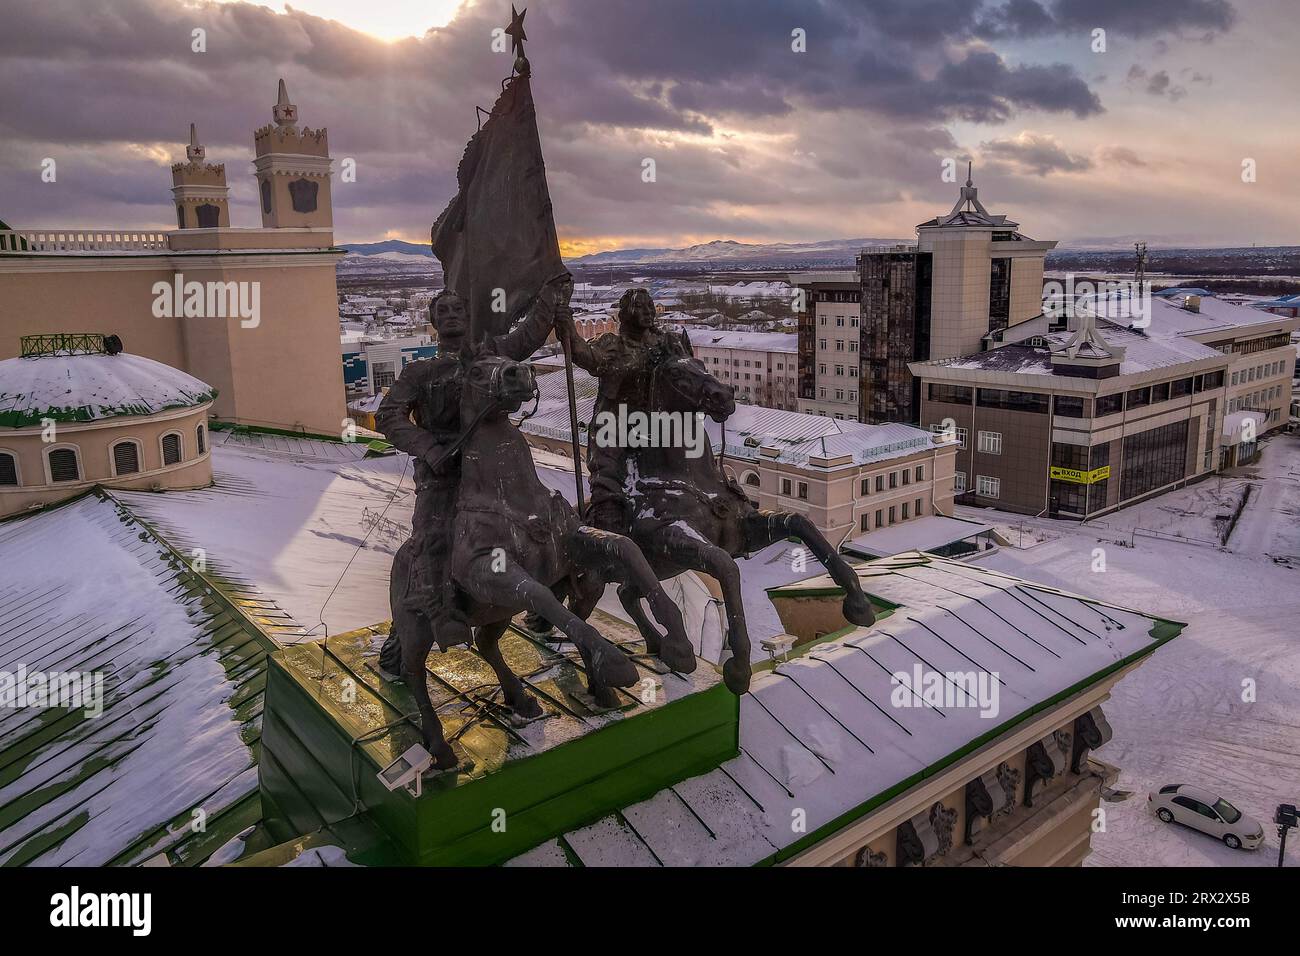 The old Soviet bronze statue of the Buryat horsemen with the flag on the top of the Ulan-Ude theater in Buryatiya, Russia, during the winter sunset. Stock Photo